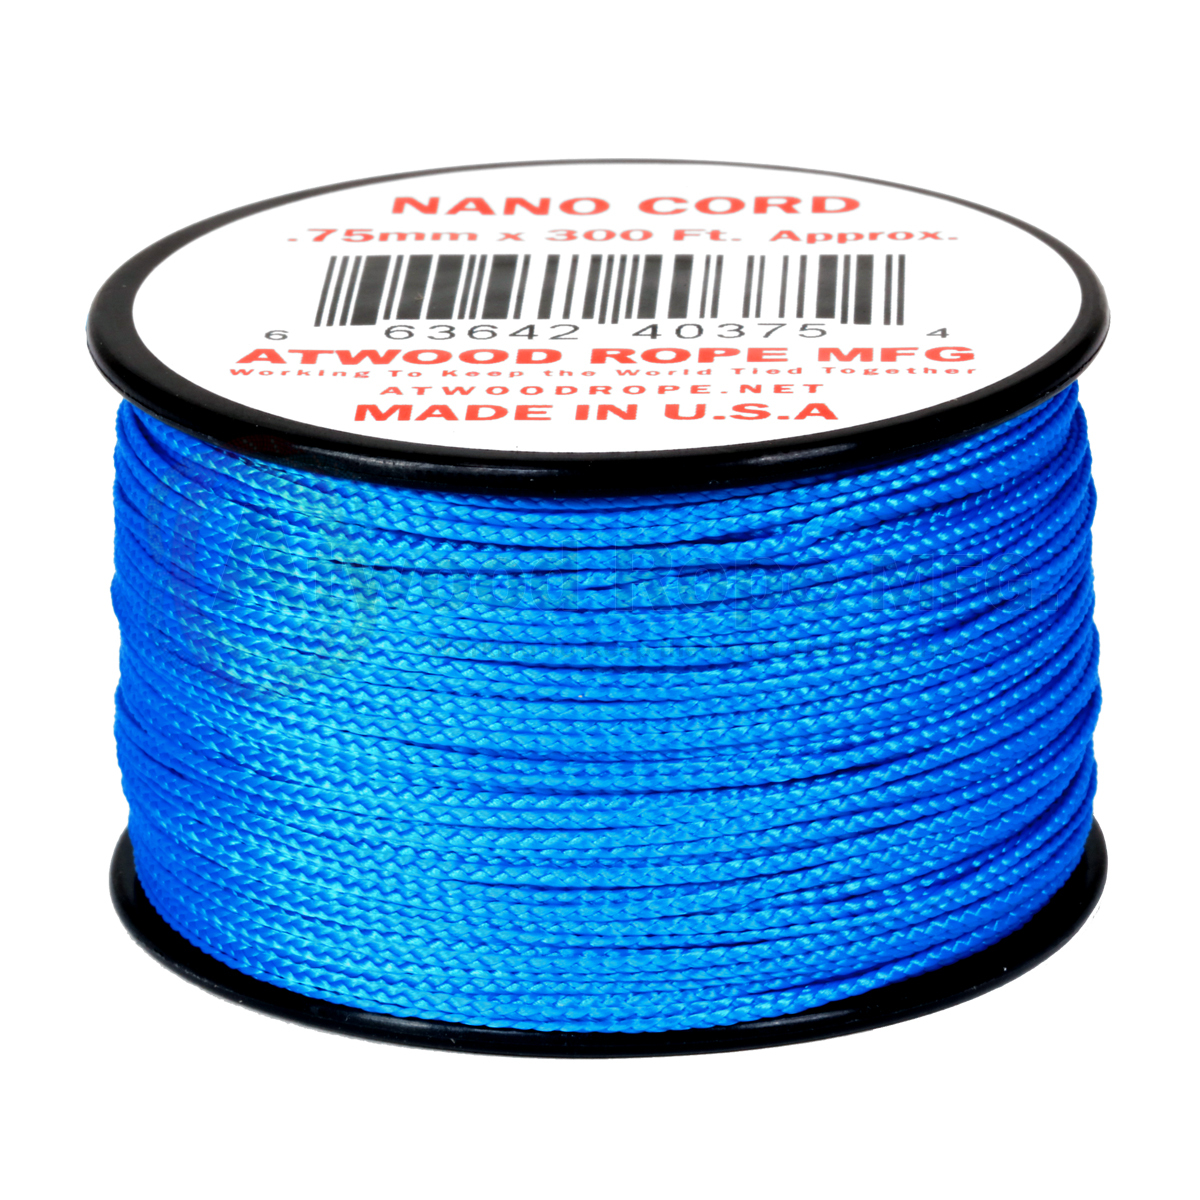 Atwood Rope MFG Nano Cord (36lb/17kg) 90m Made in USA, Various Colours